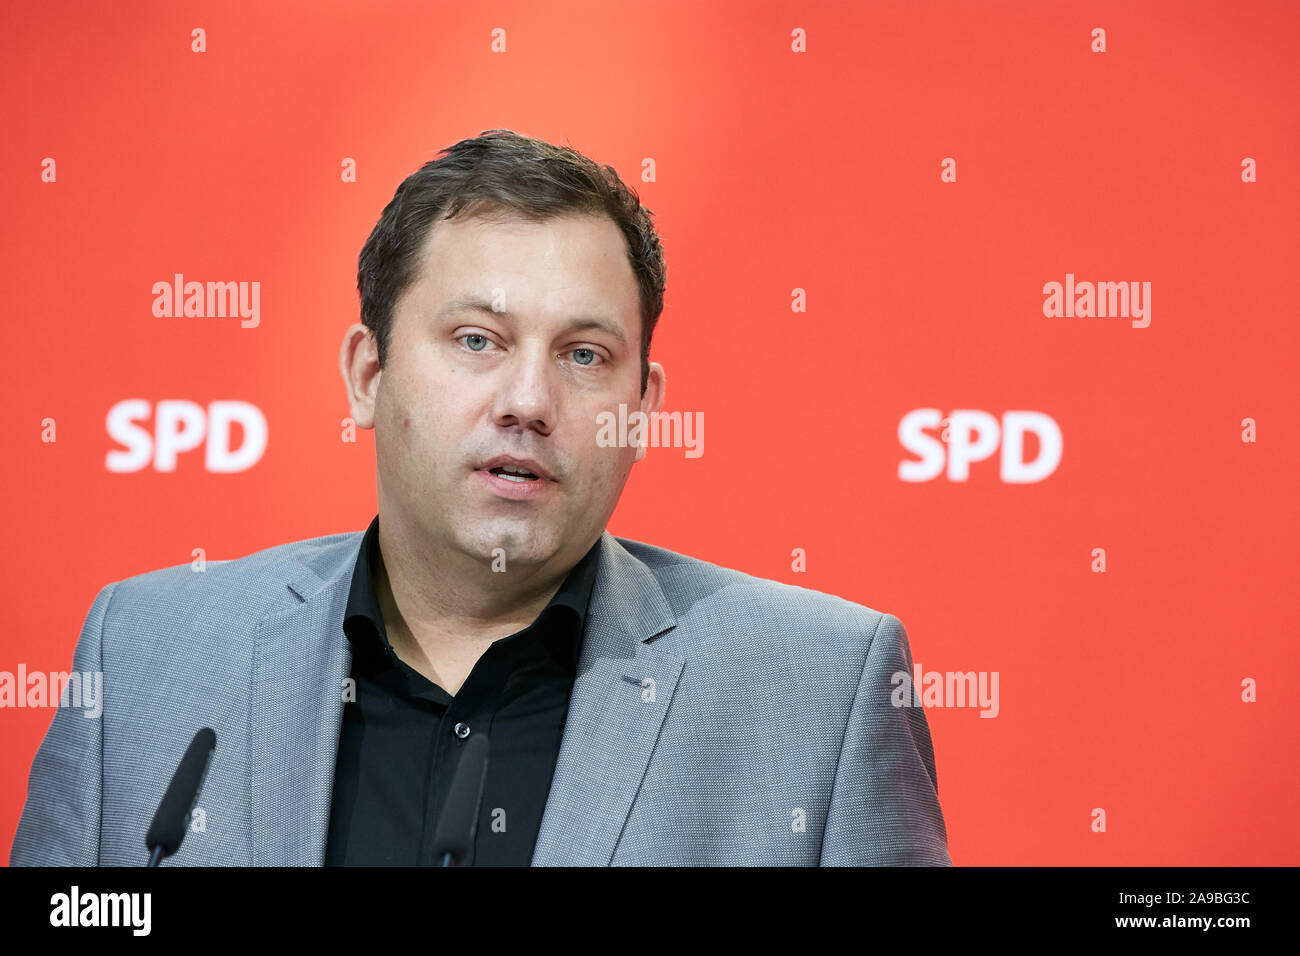 14.10.2019, Berlin, Berlin, Germany - Lars Klingbeil, Secretary General of the SPD, at a press conference in the Willy Brandt House. 00R191014D022CARO Stock Photo